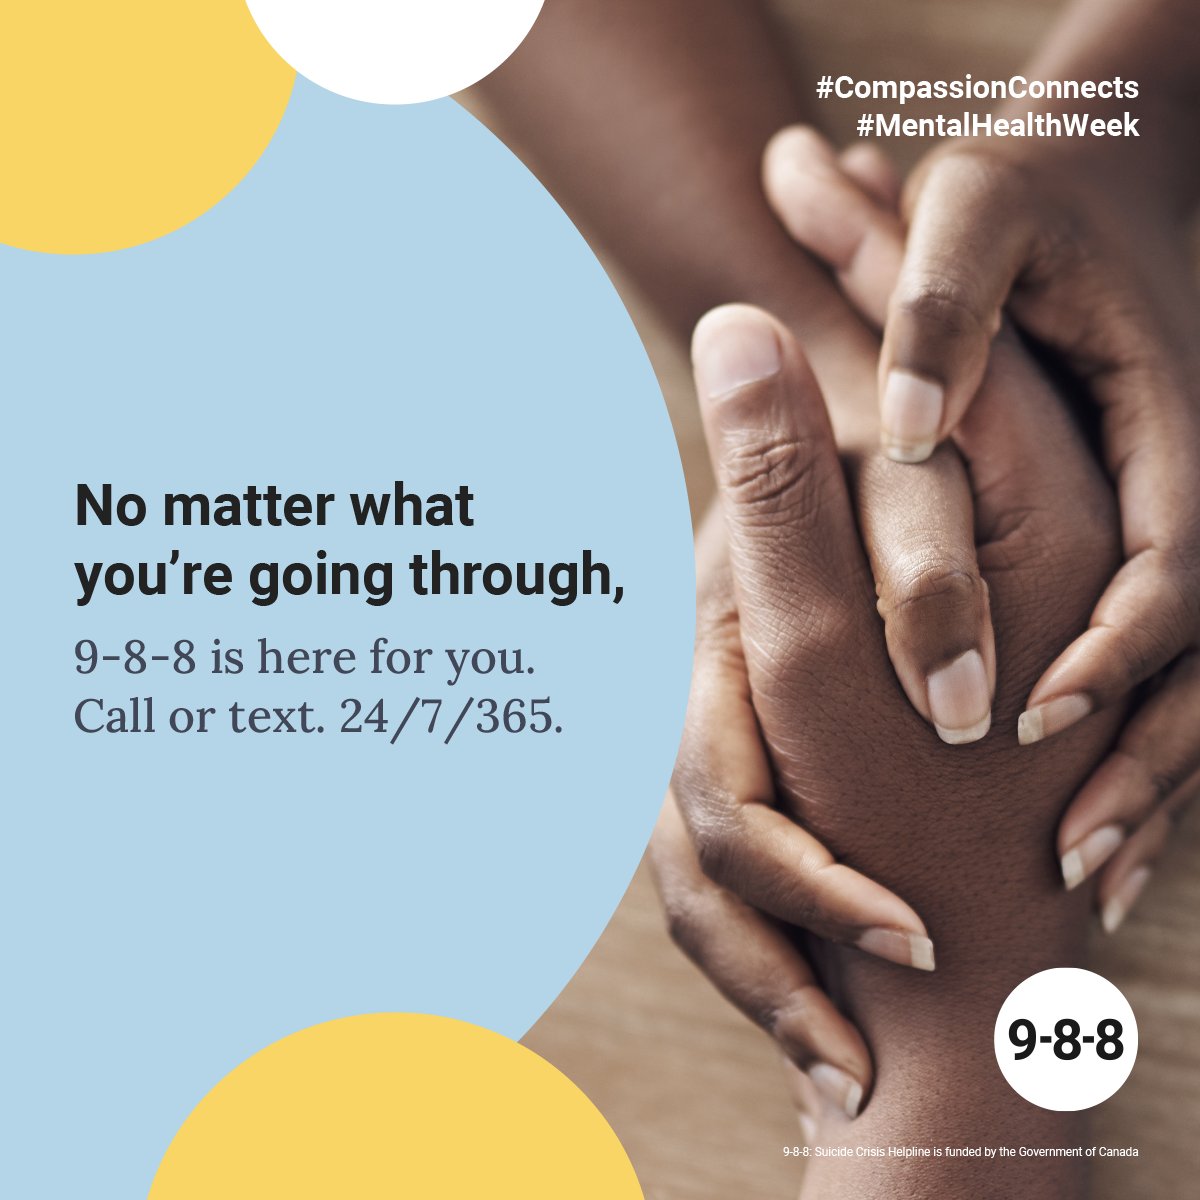 During #MentalHealthWeek and every week, we’re here to listen, no matter what you are going through. #CompassionConnects